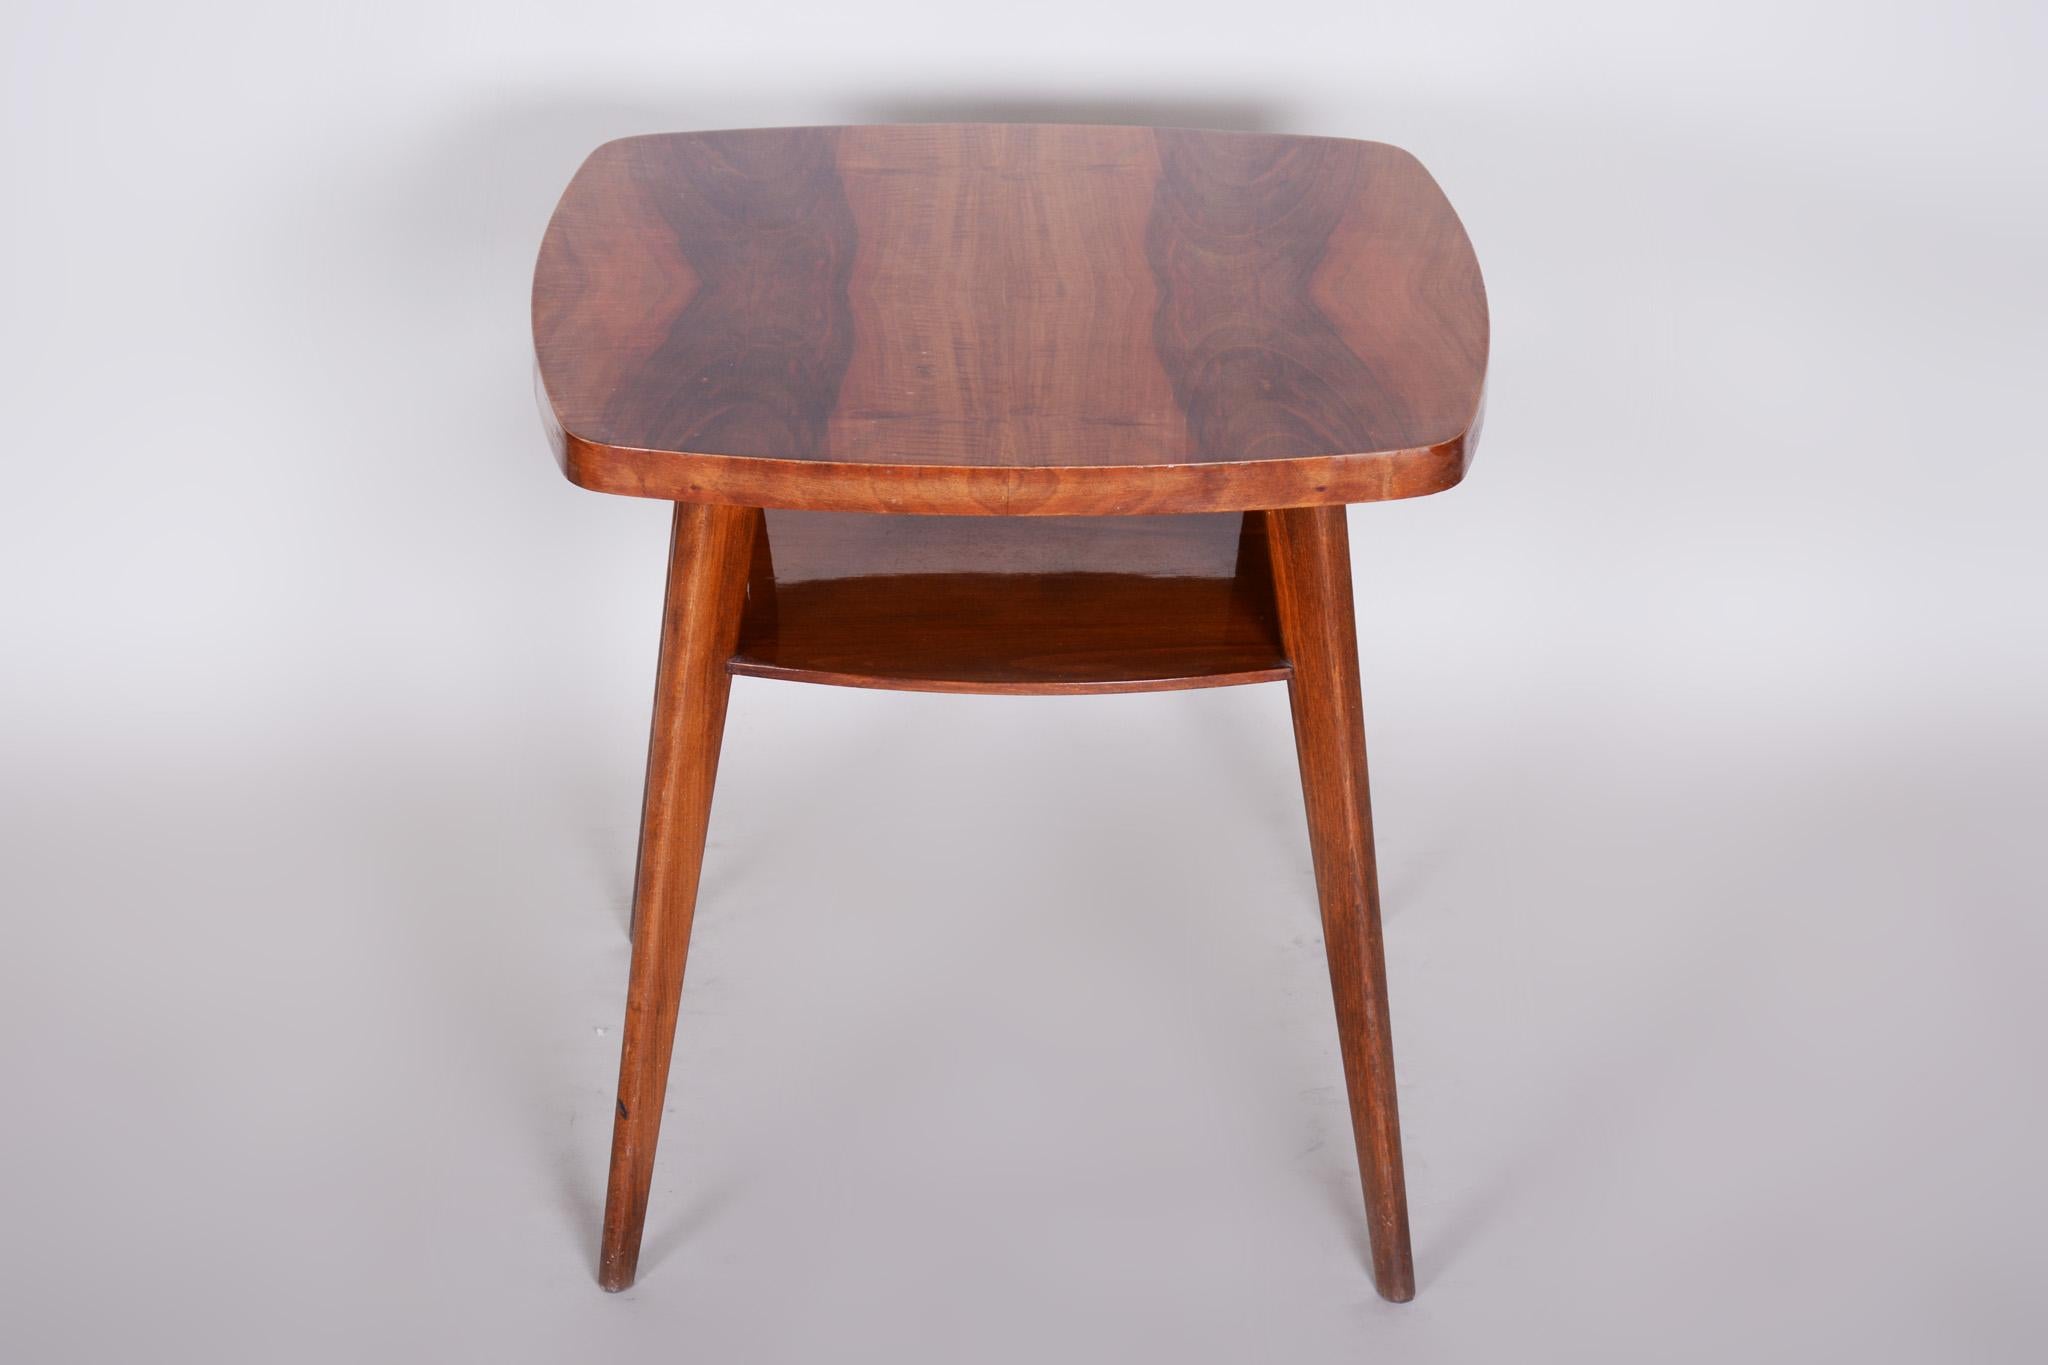 Mid-Century Modern Walnut Table, Czech Midcentury, Preserved Original Condition, 1950s For Sale